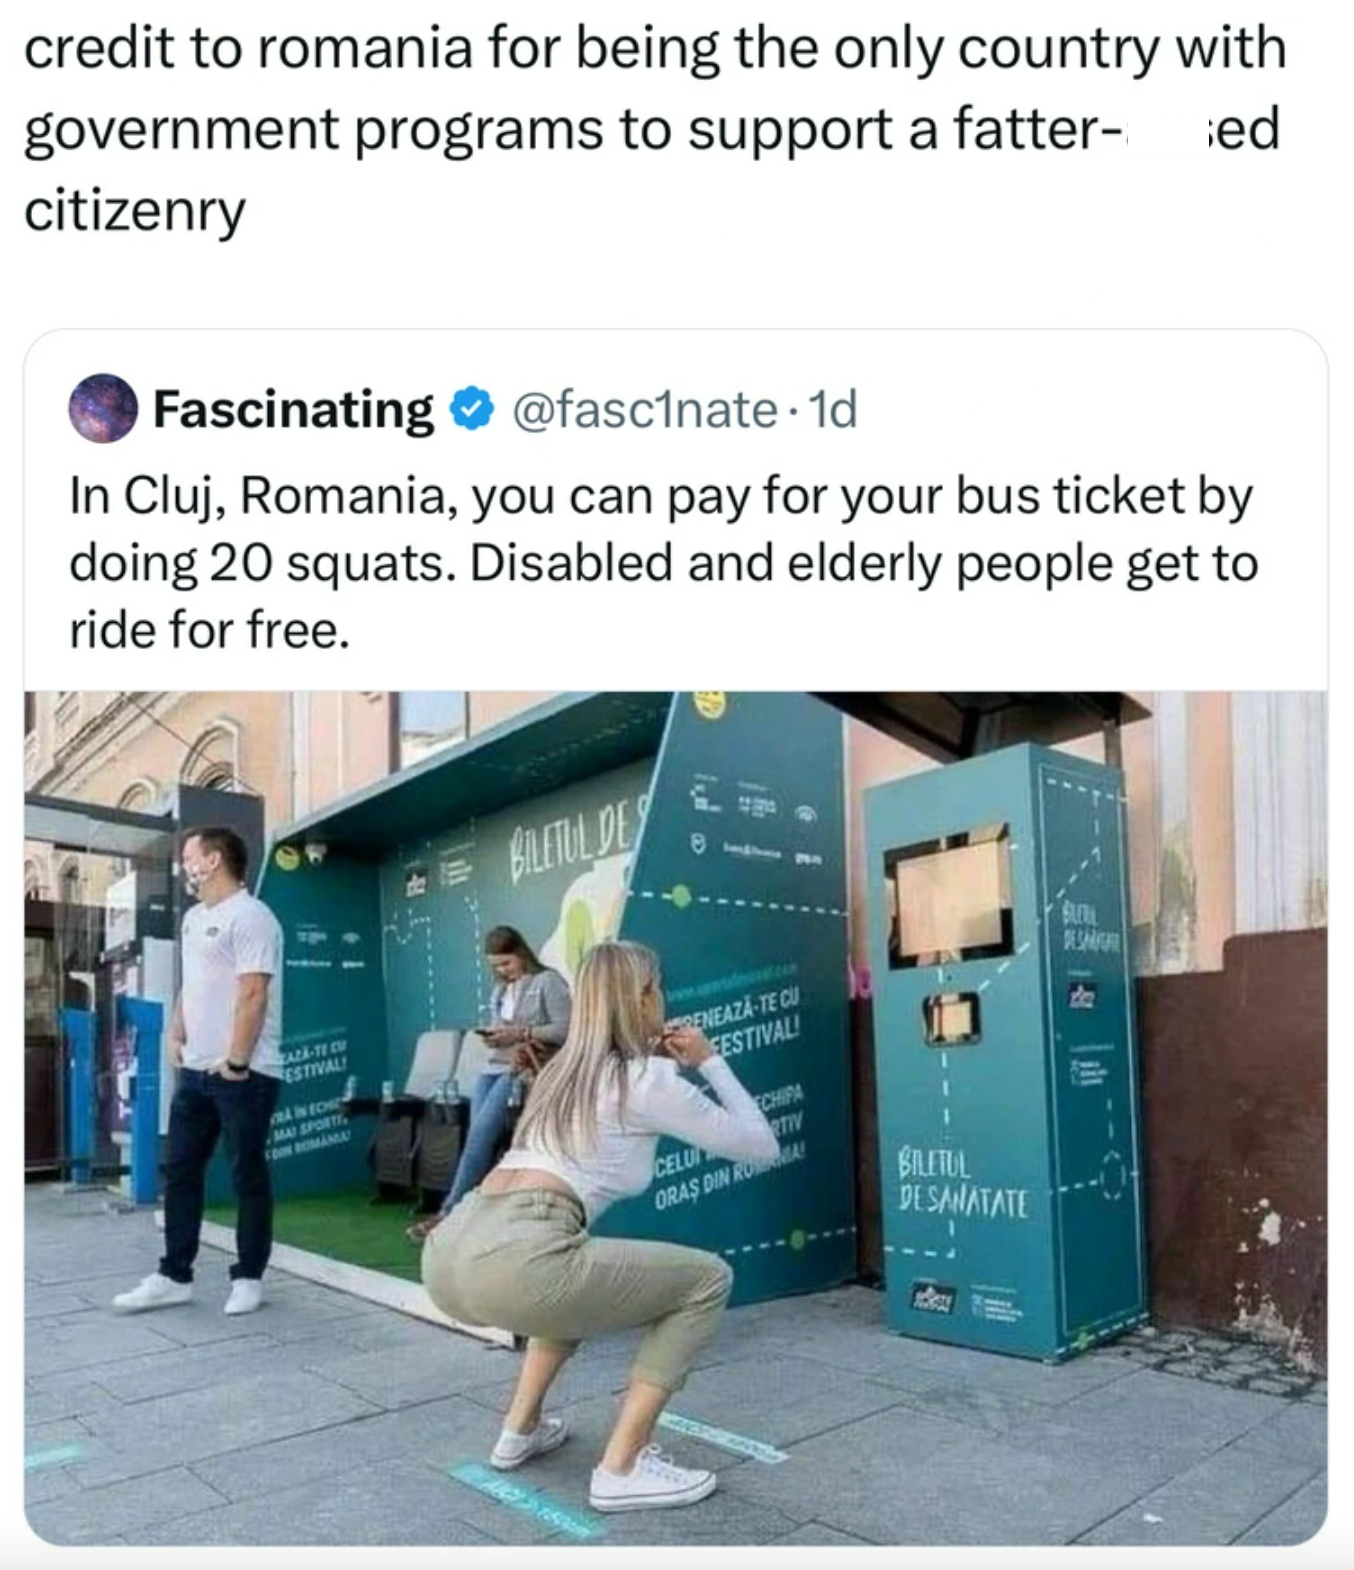 romania squats for bus ticket - credit to romania for being the only country with government programs to support a fatter ed citizenry Fascinating . 1d In Cluj, Romania, you can pay for your bus ticket by doing 20 squats. Disabled and elderly people get t